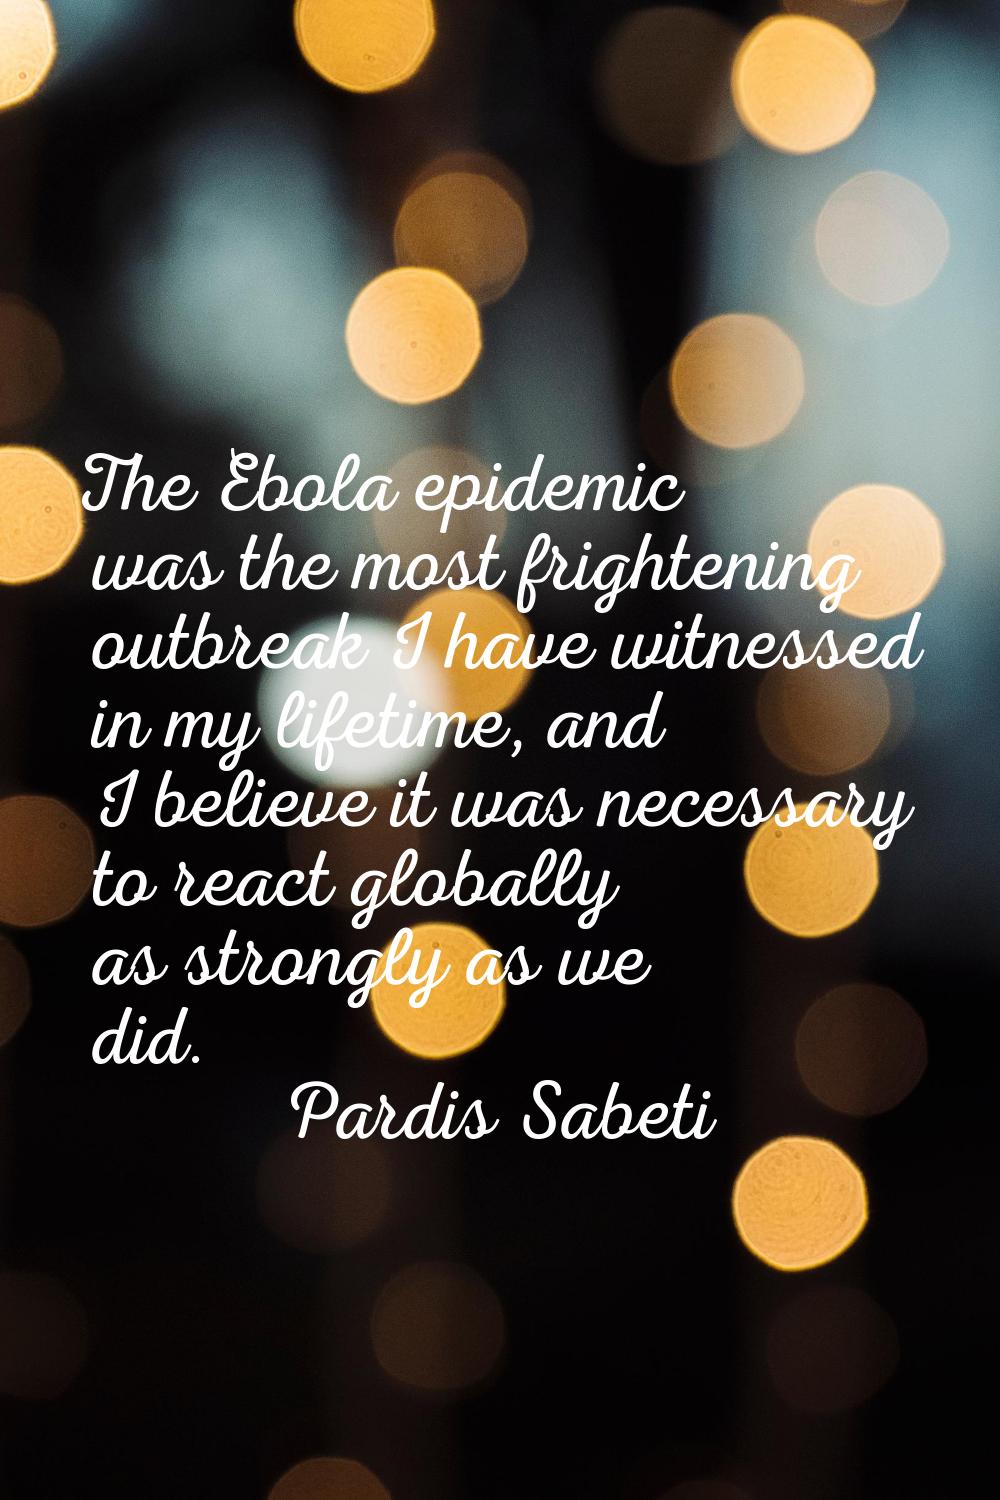 The Ebola epidemic was the most frightening outbreak I have witnessed in my lifetime, and I believe